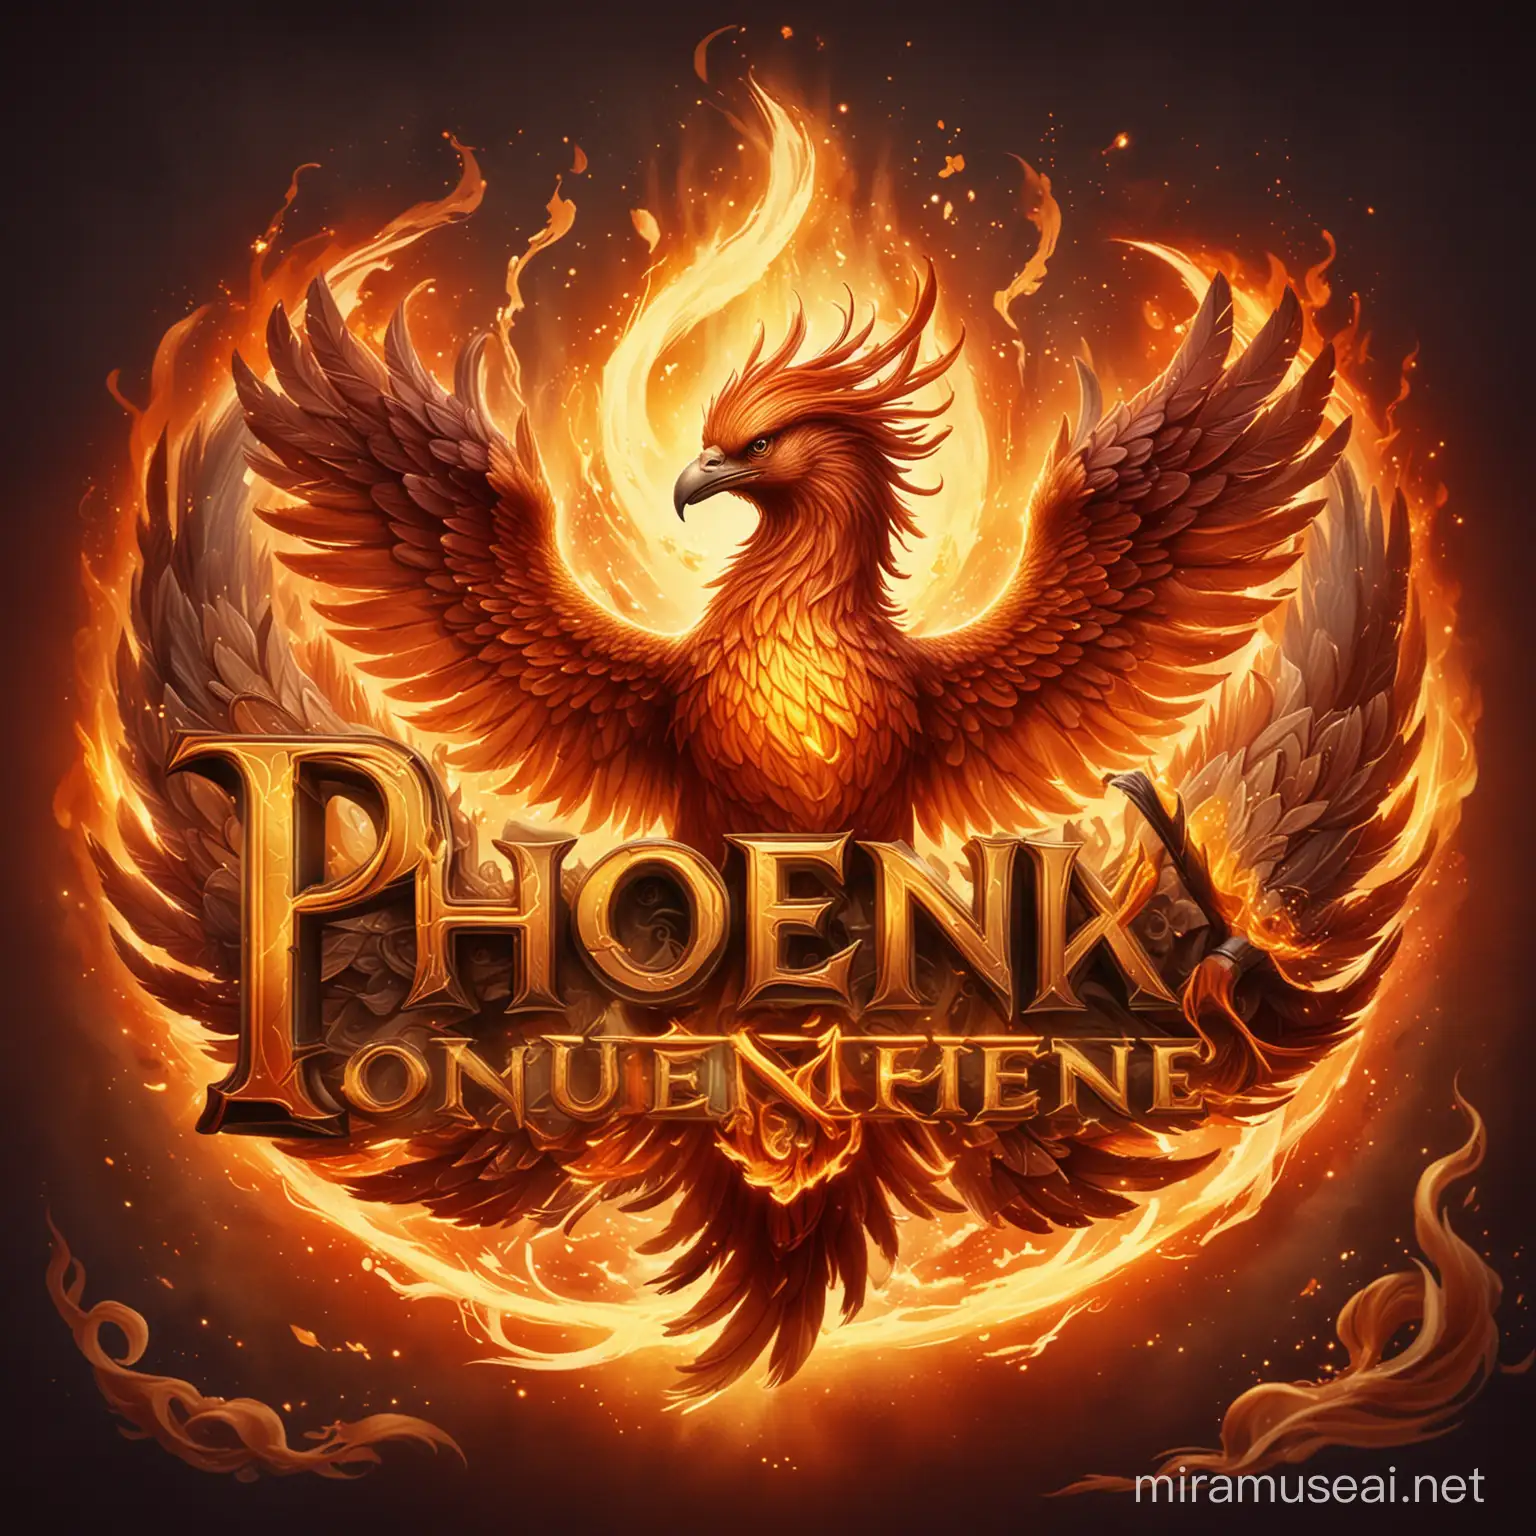 The word "Phoenix" is elegantly inscribed in fiery feathers, set in the enchanting style of Sunfire Summit art. Surrounded by swirling flames and backed by a blazing sun, this design exudes the essence of a game logo, ideal for a captivating mobile game background.